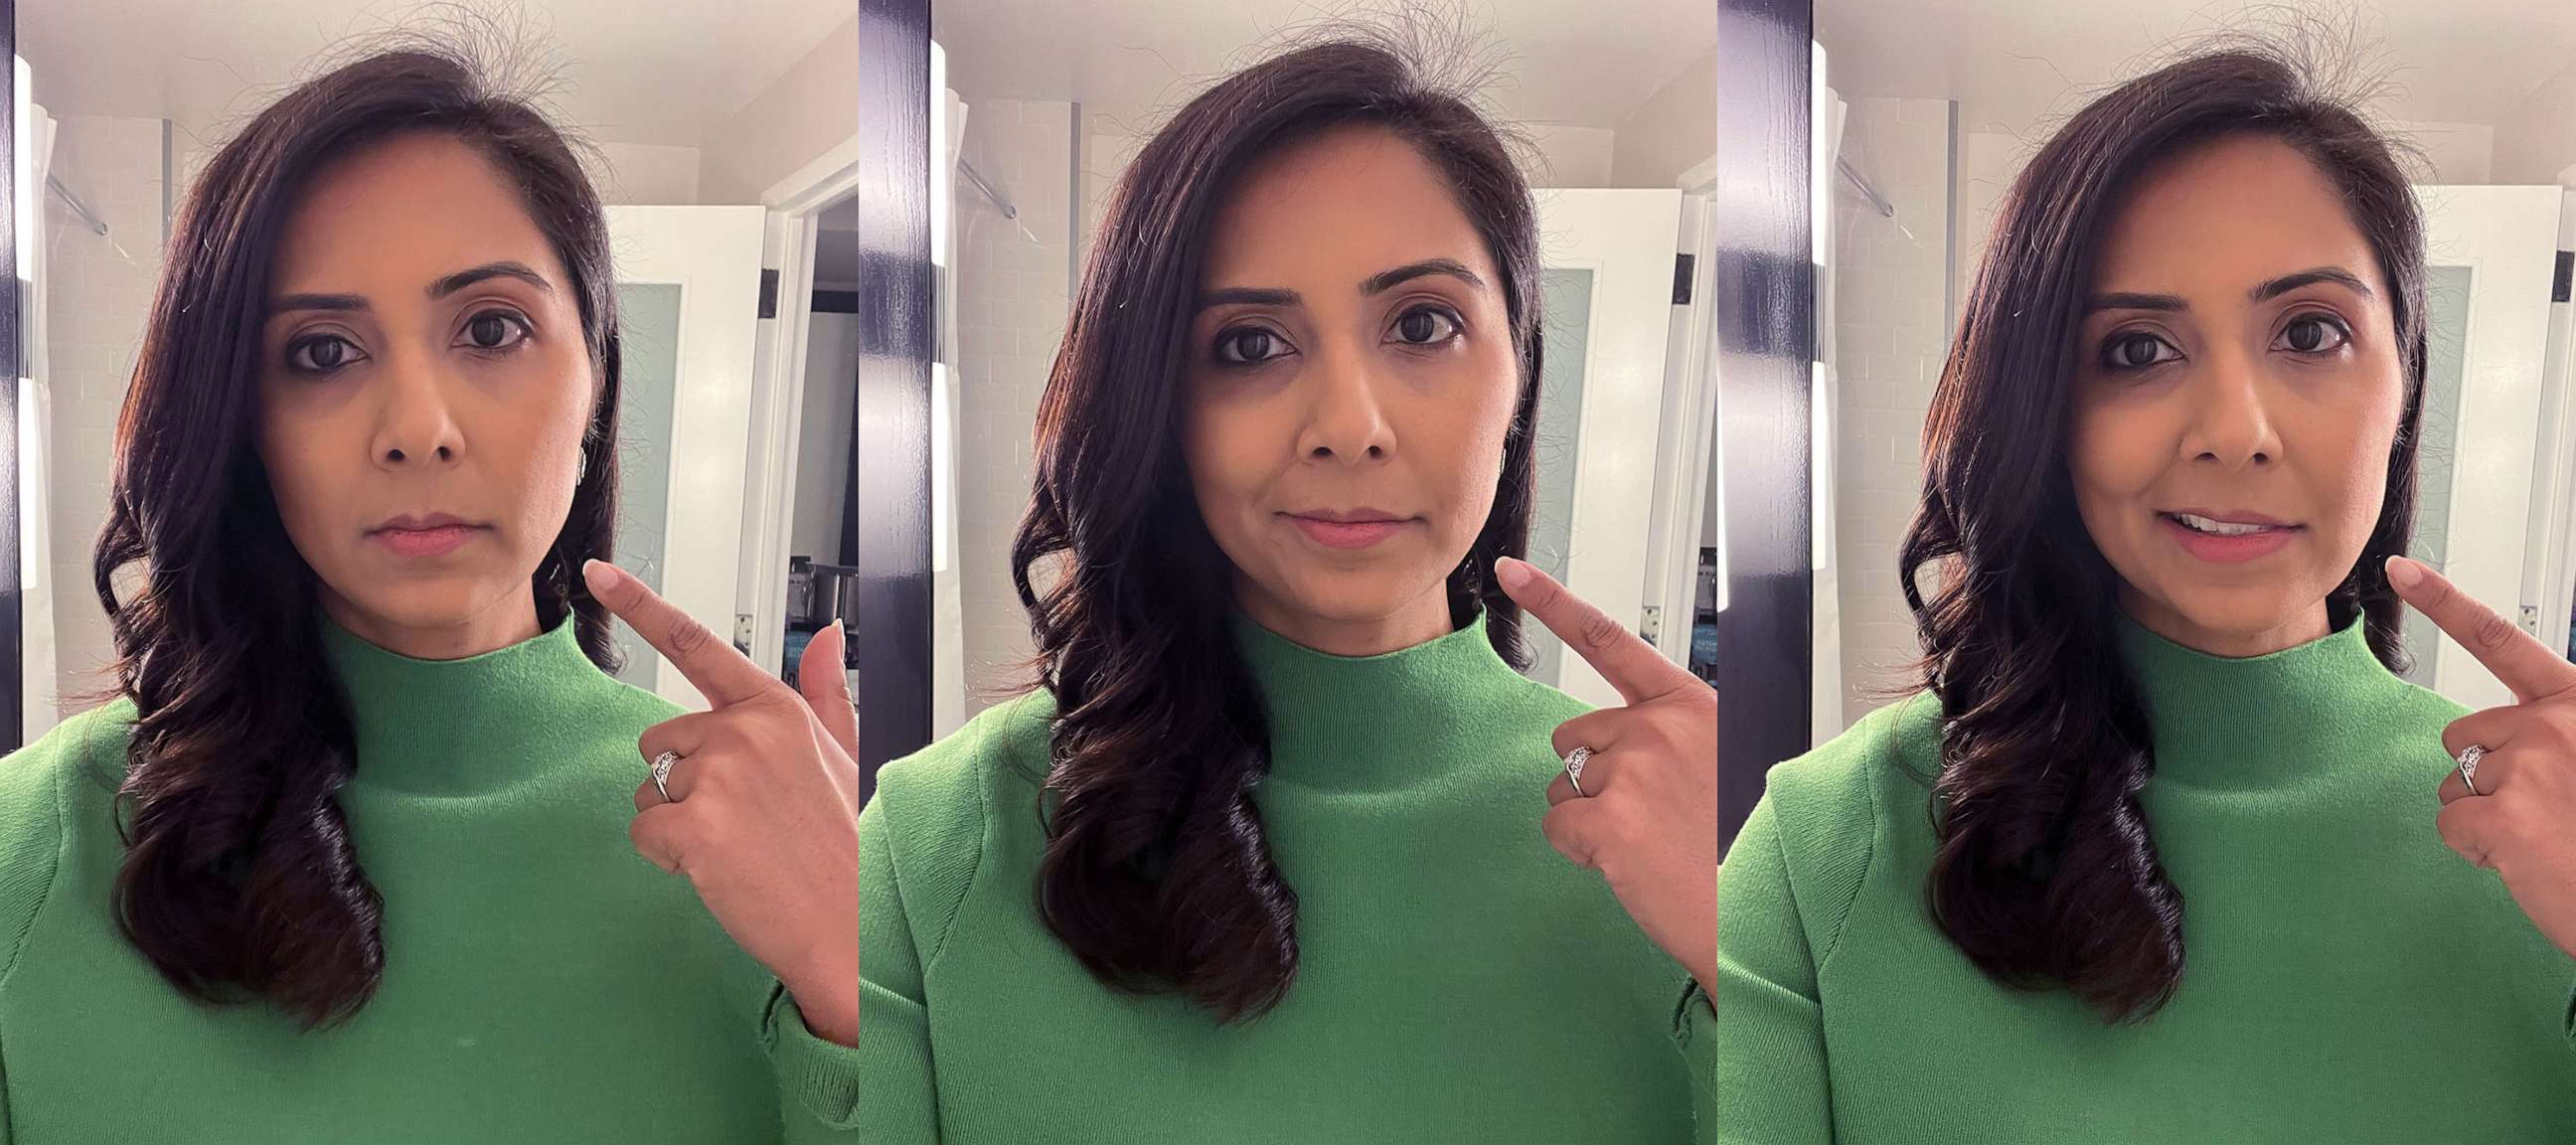 9 New Poses That You Can Try To Get A Perfect Selfie Next Time!